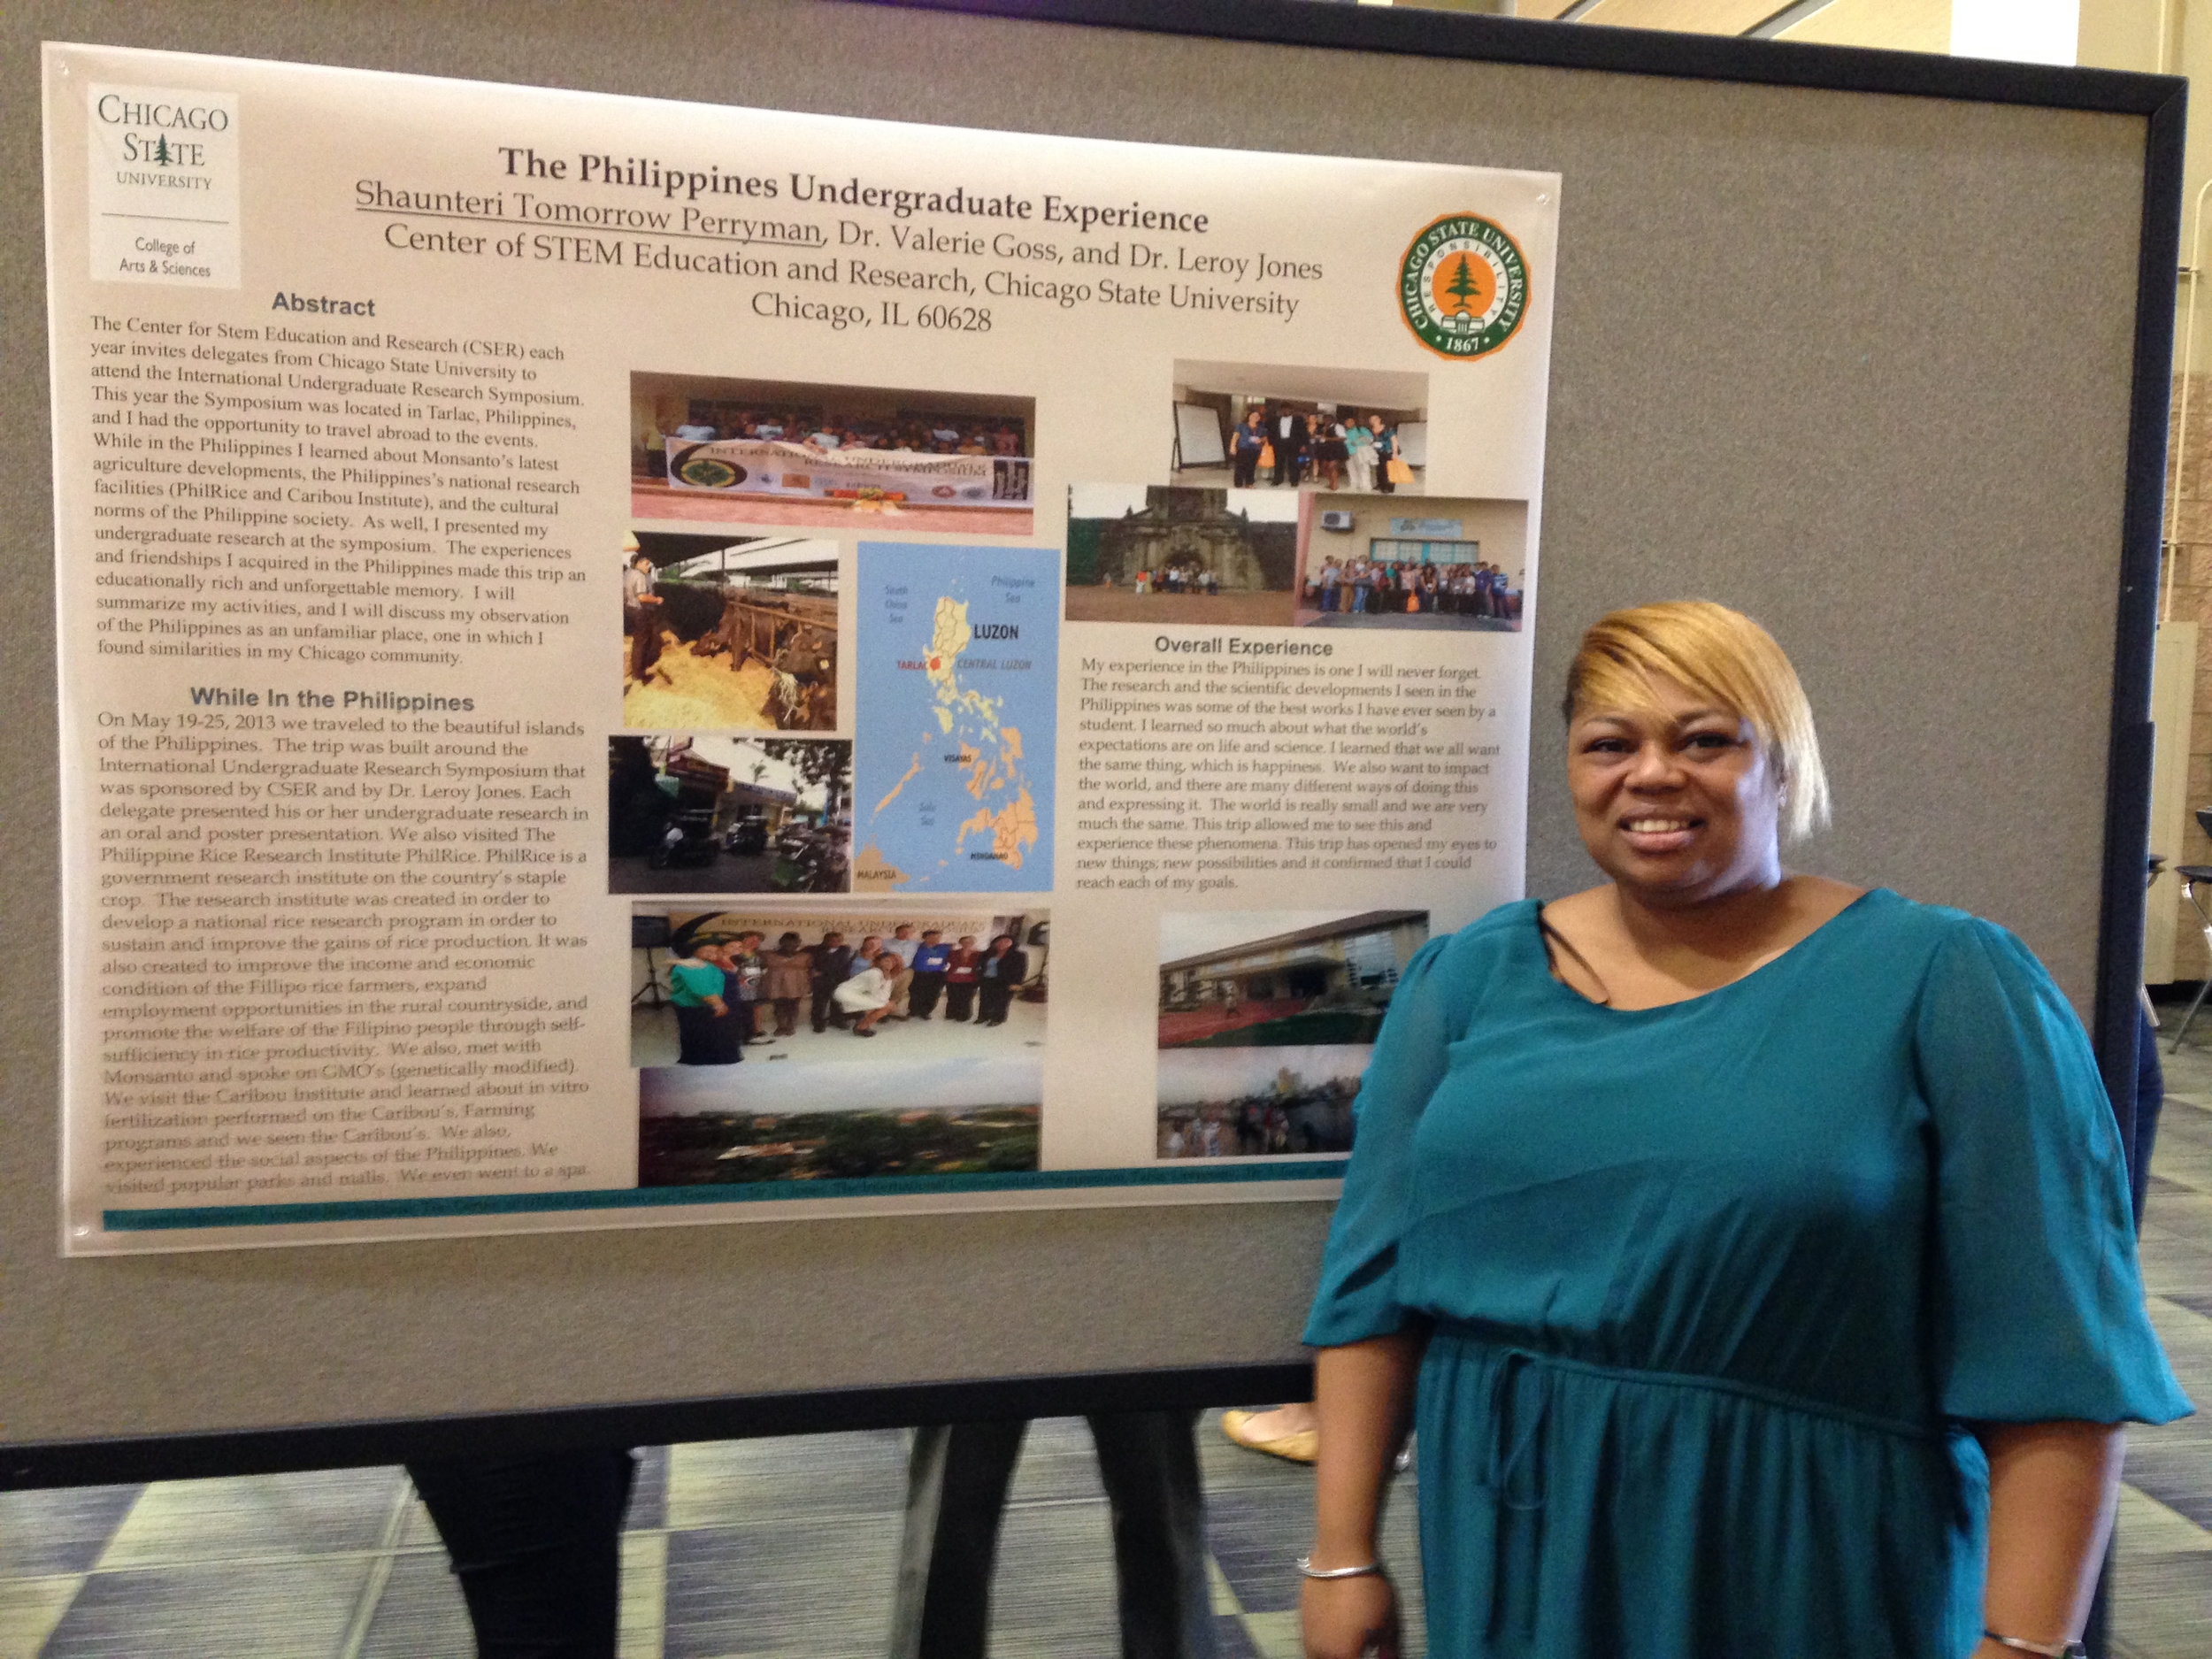 Chicago State University Annual Science Conference